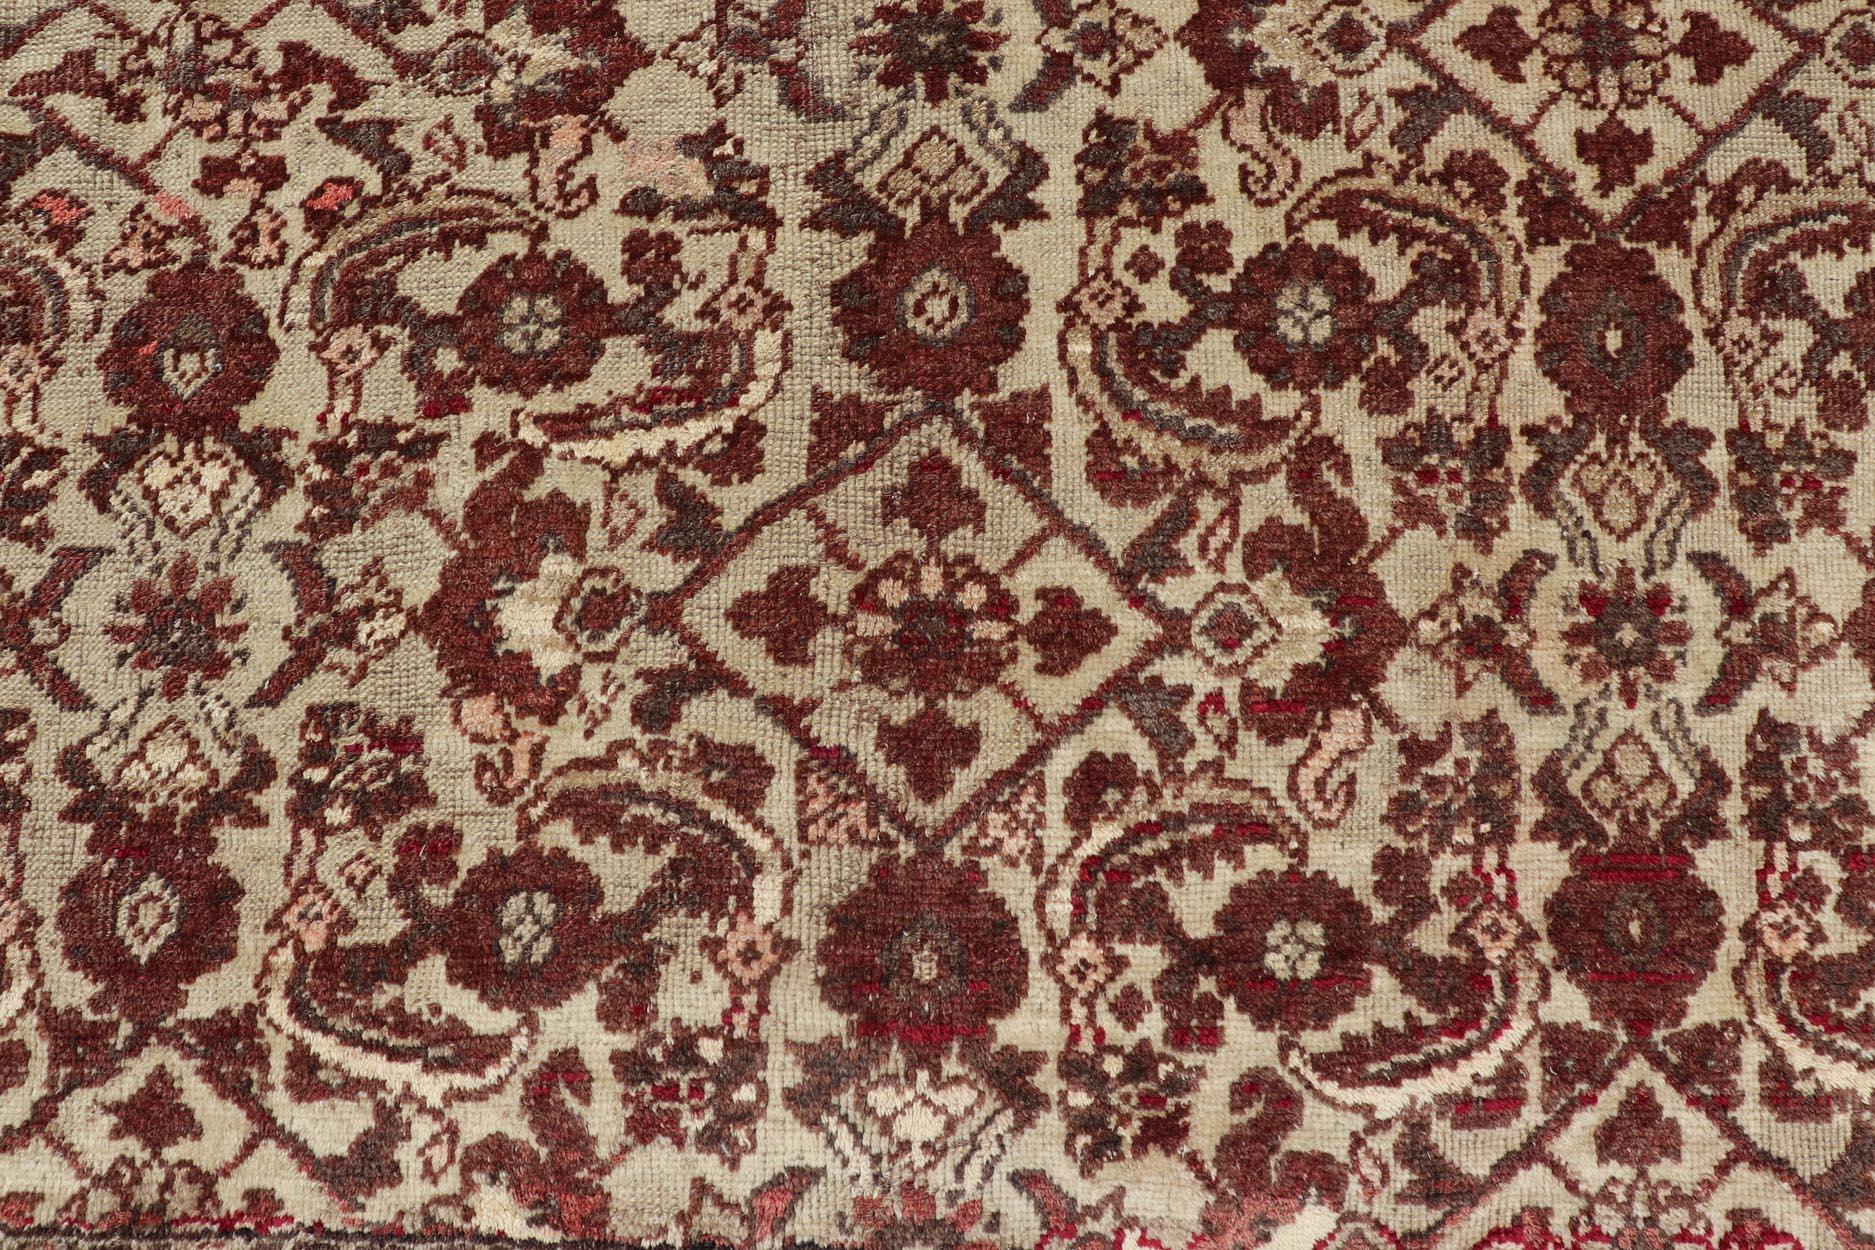 Antique Turkish Sivas Rug with Tan Background and Maroon, Eggplant, Brown Color  For Sale 5